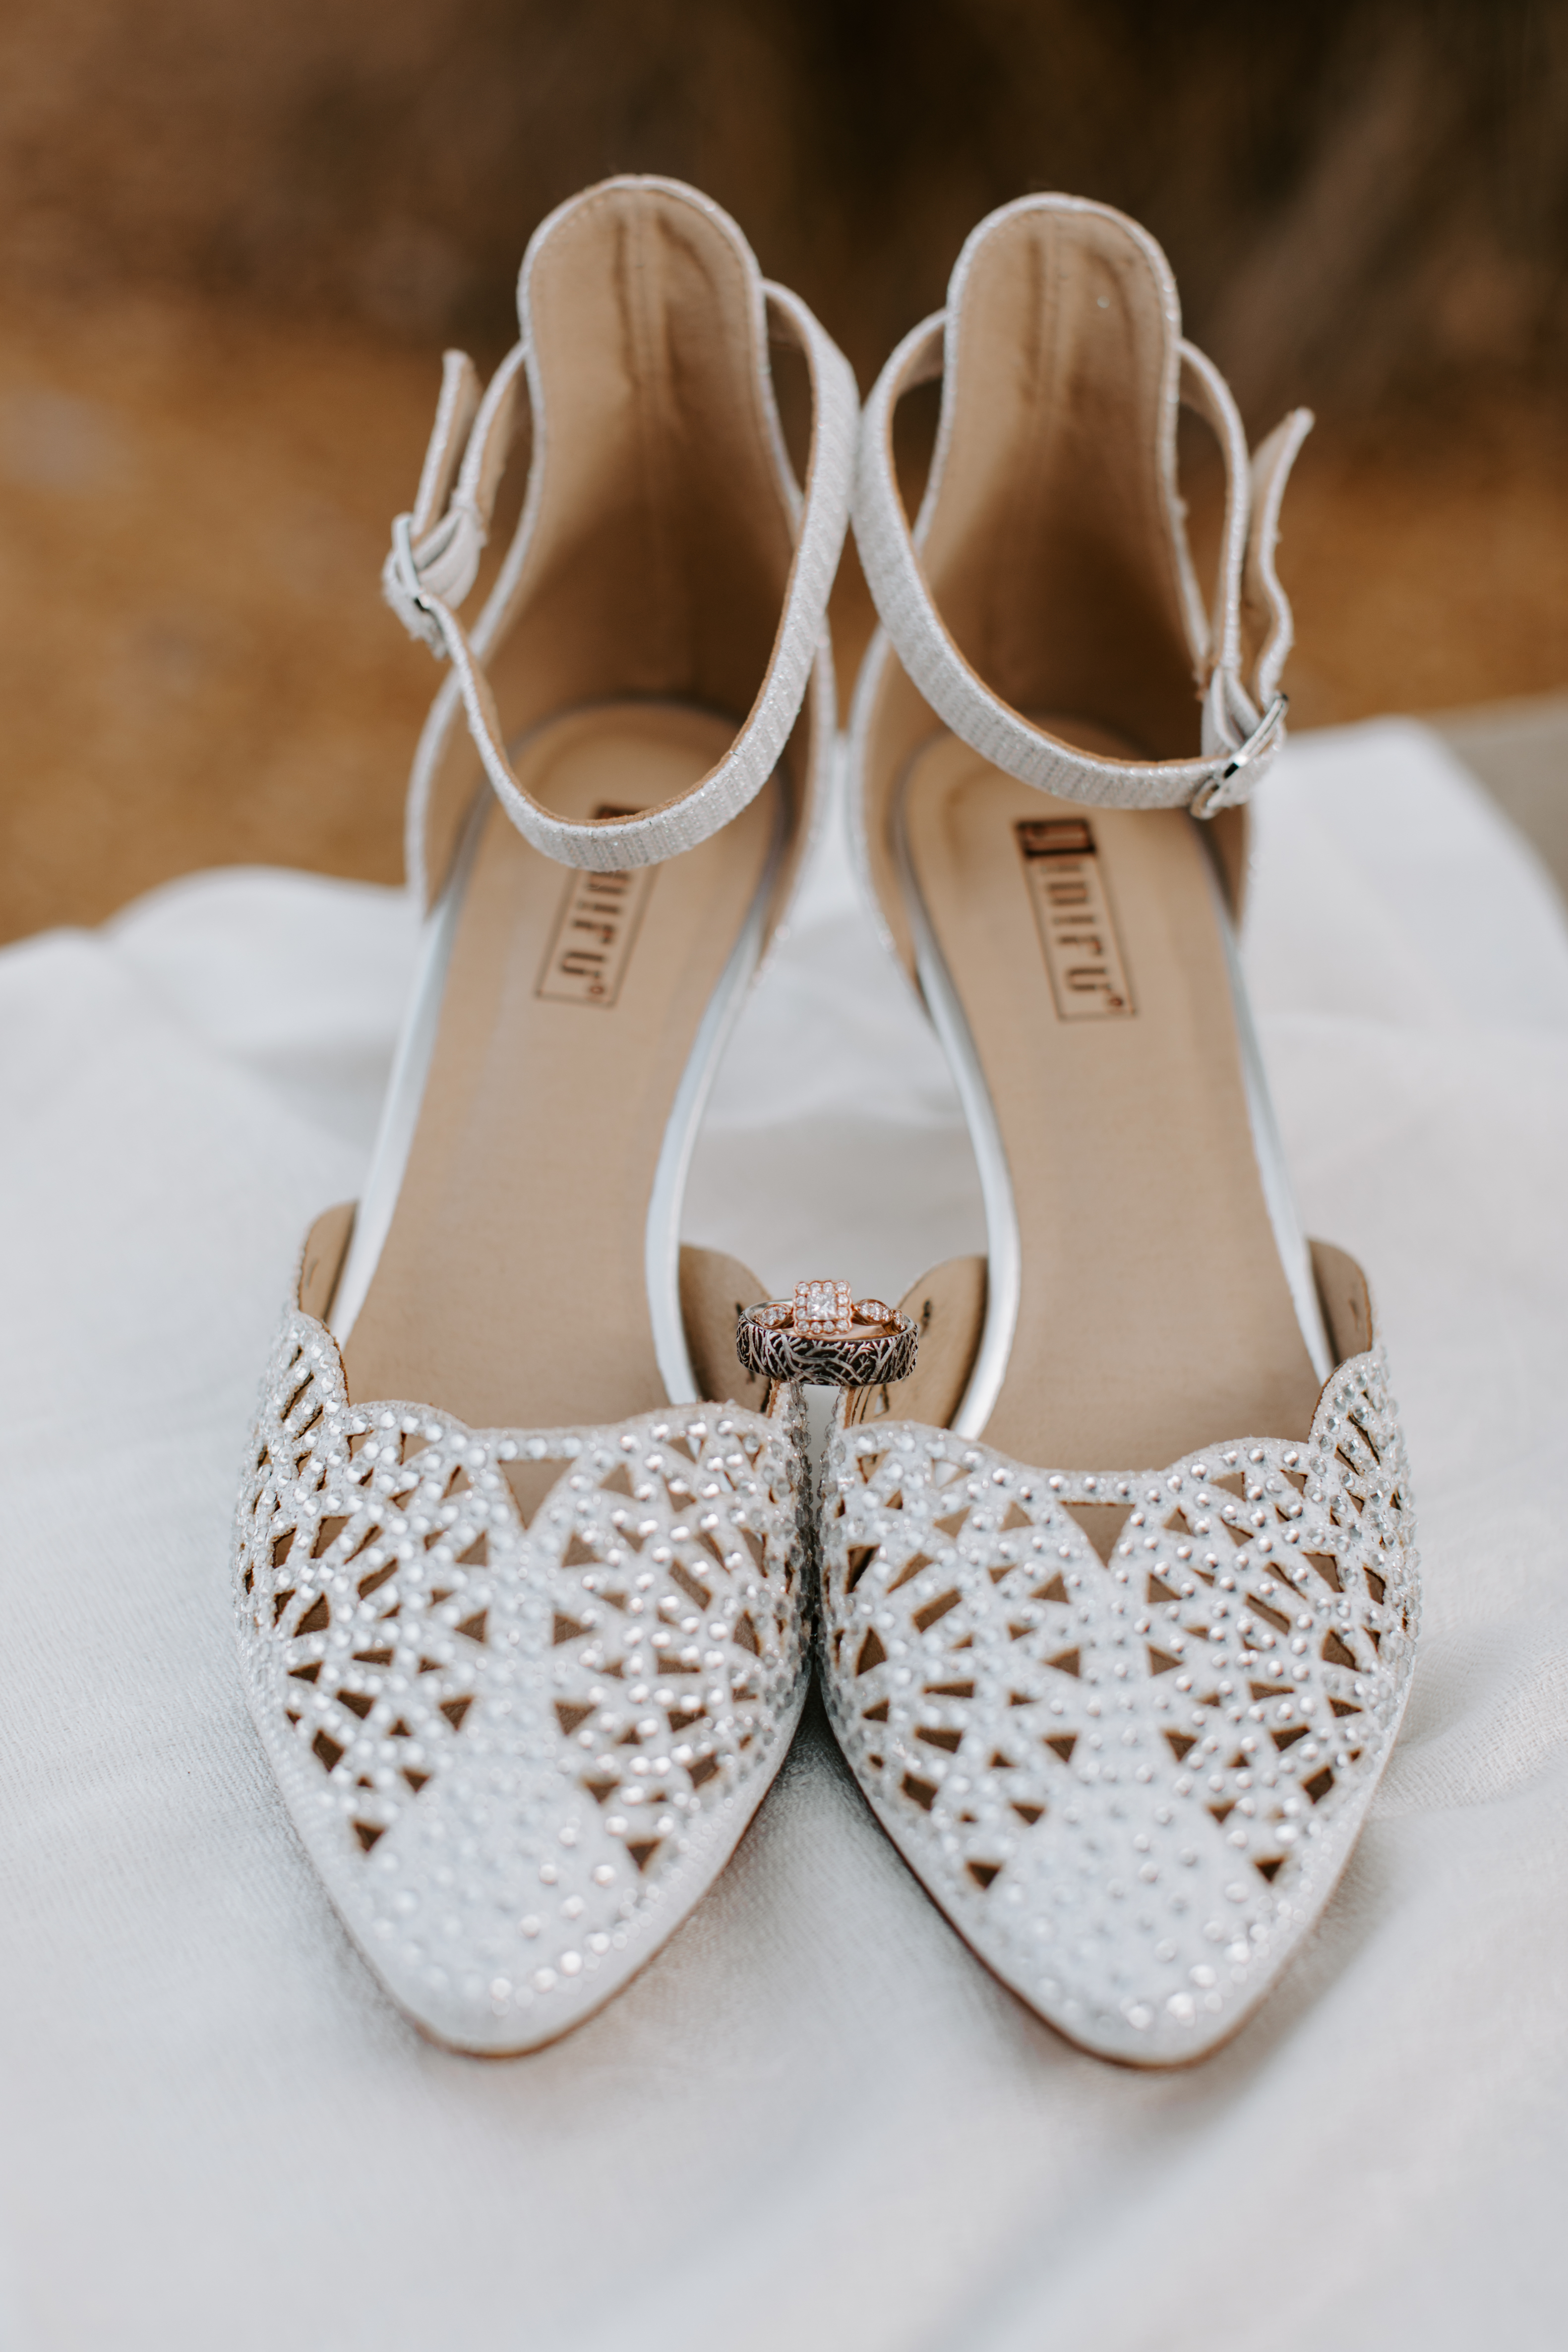 Wedding shoes rings